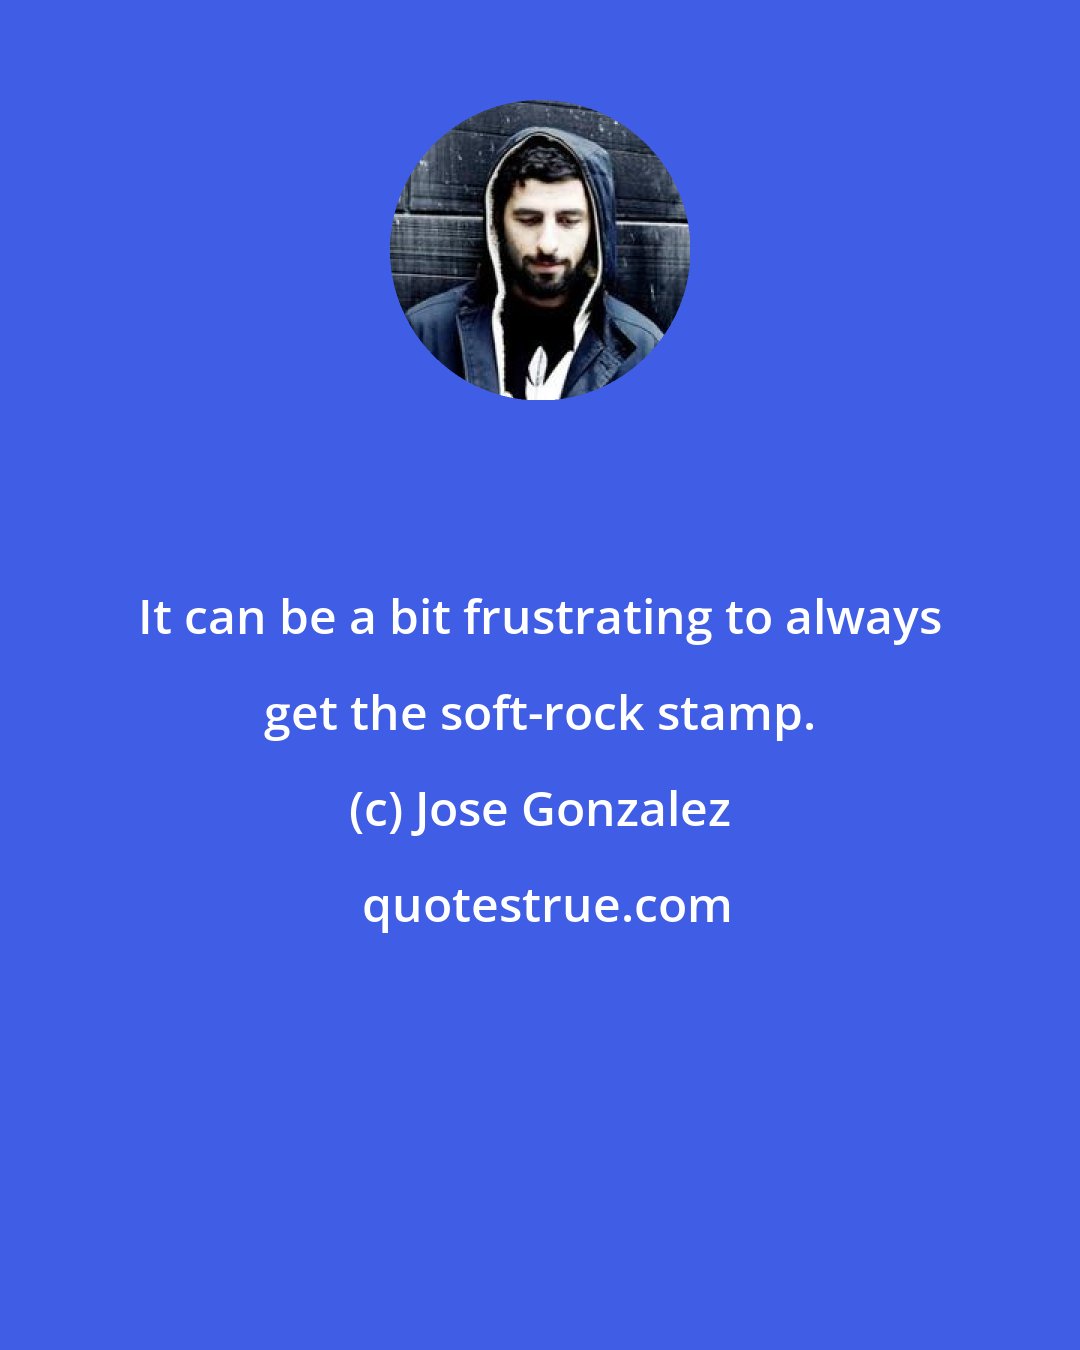 Jose Gonzalez: It can be a bit frustrating to always get the soft-rock stamp.